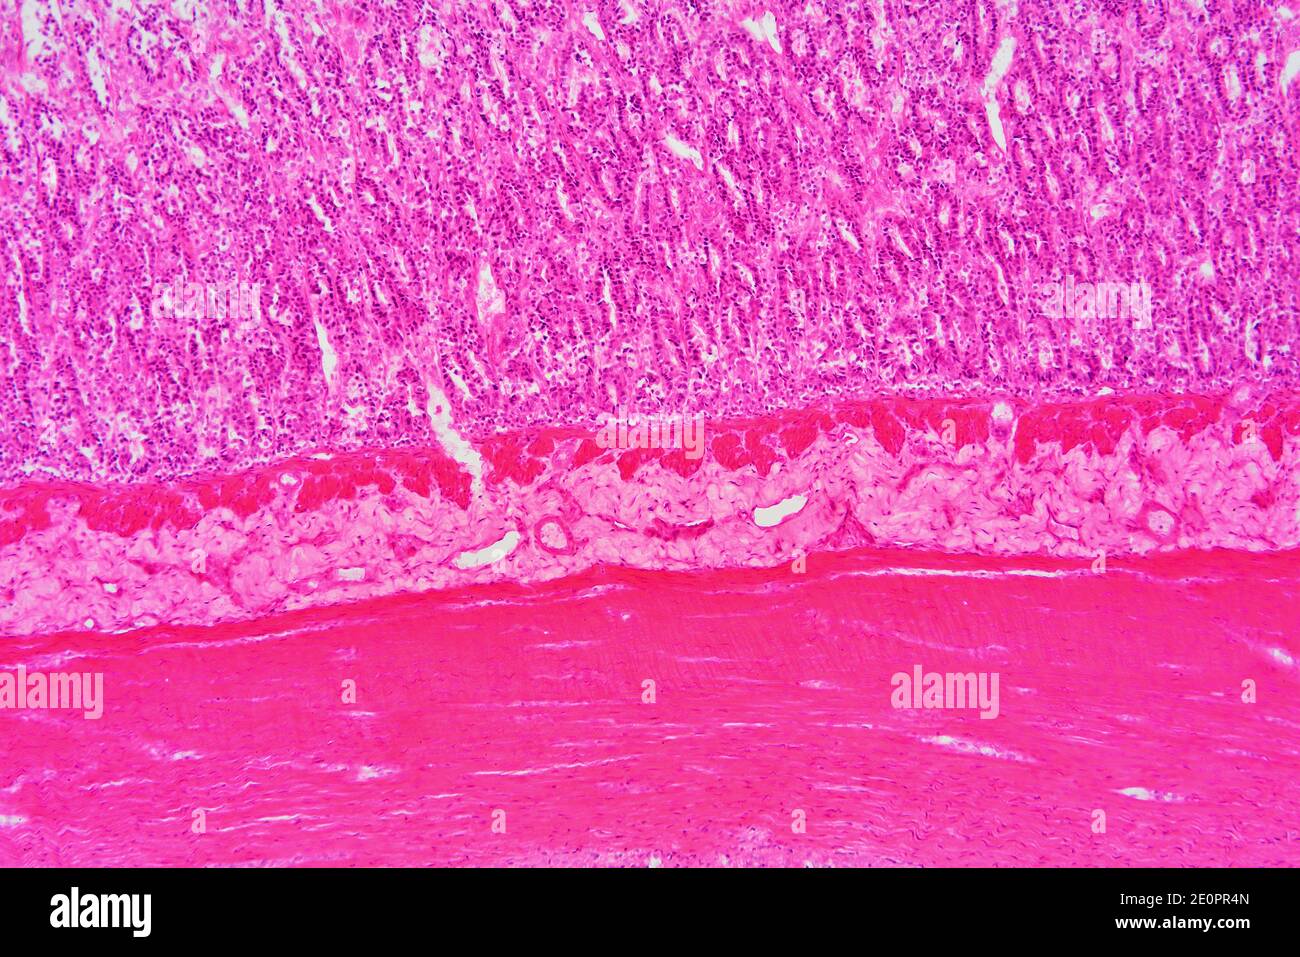 Human small intestine (duodenum) showing from bottom to top: muscular fibers, submucosa and mucosa with Lieberkhun crypts. X75 at 10 cm wide. Stock Photo